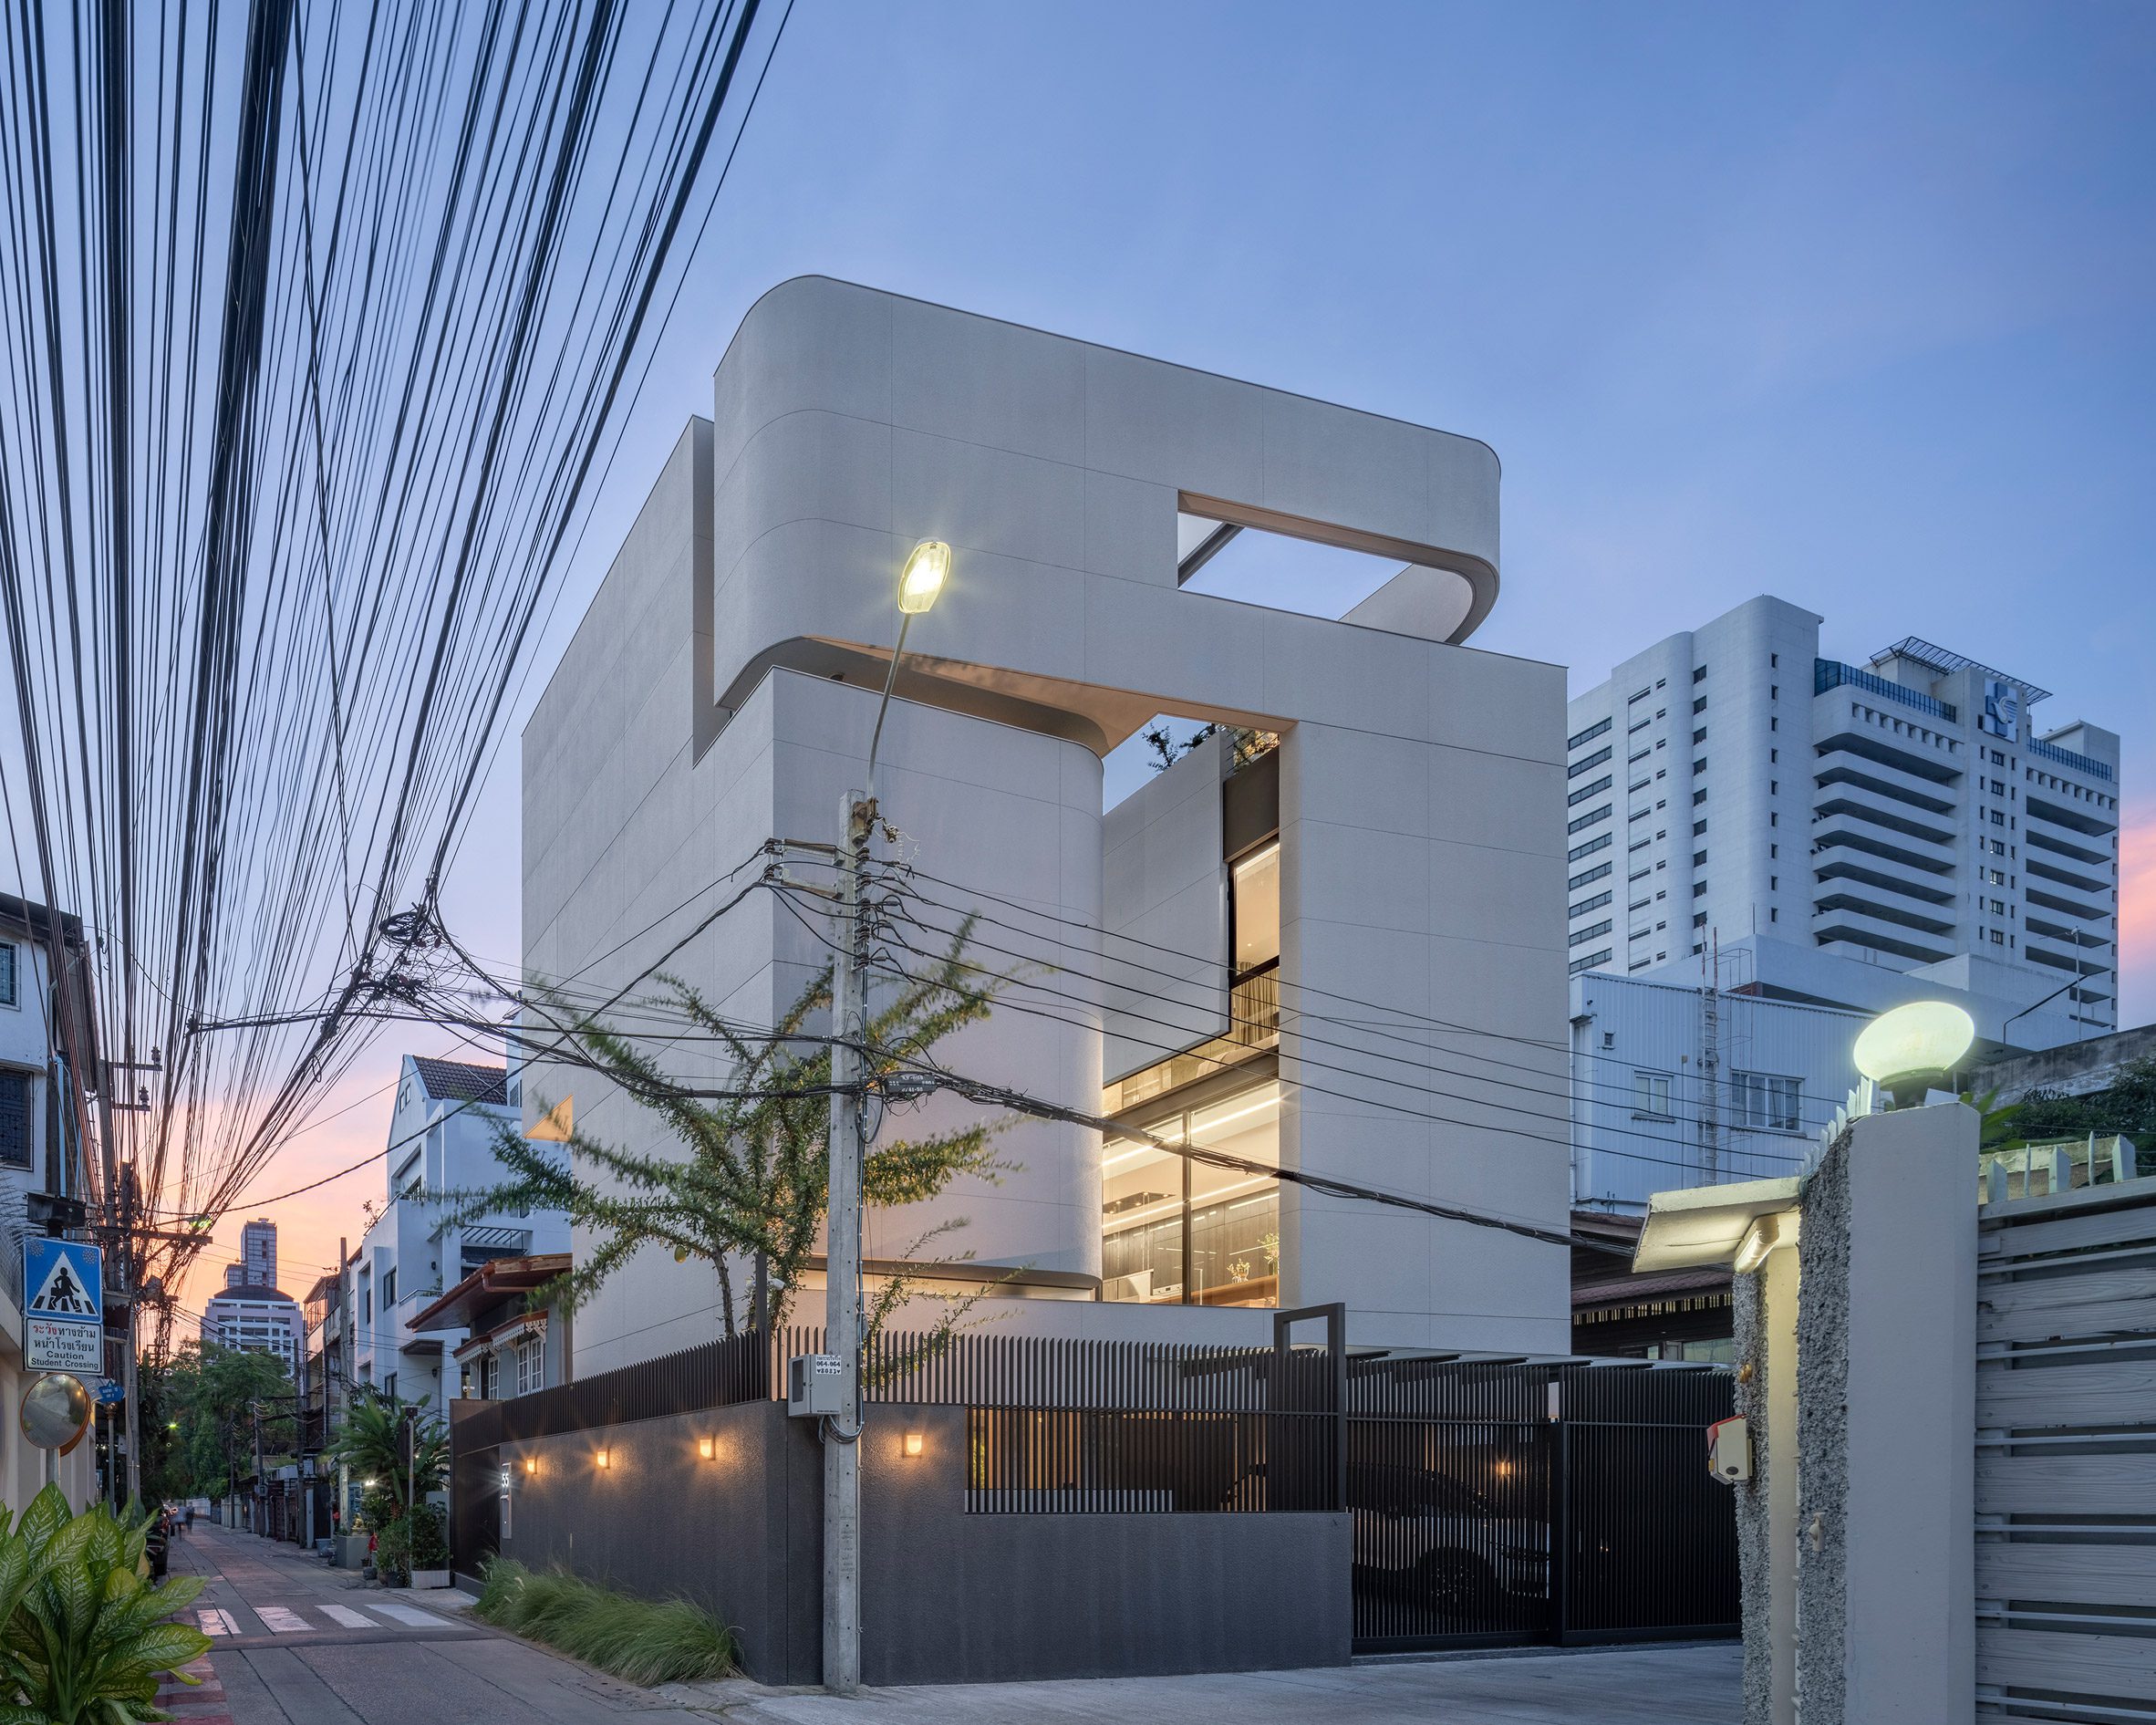 Sunset view of the exterior of 55 Sathorn house by Kuanchanok Pakavaleetorn Architects